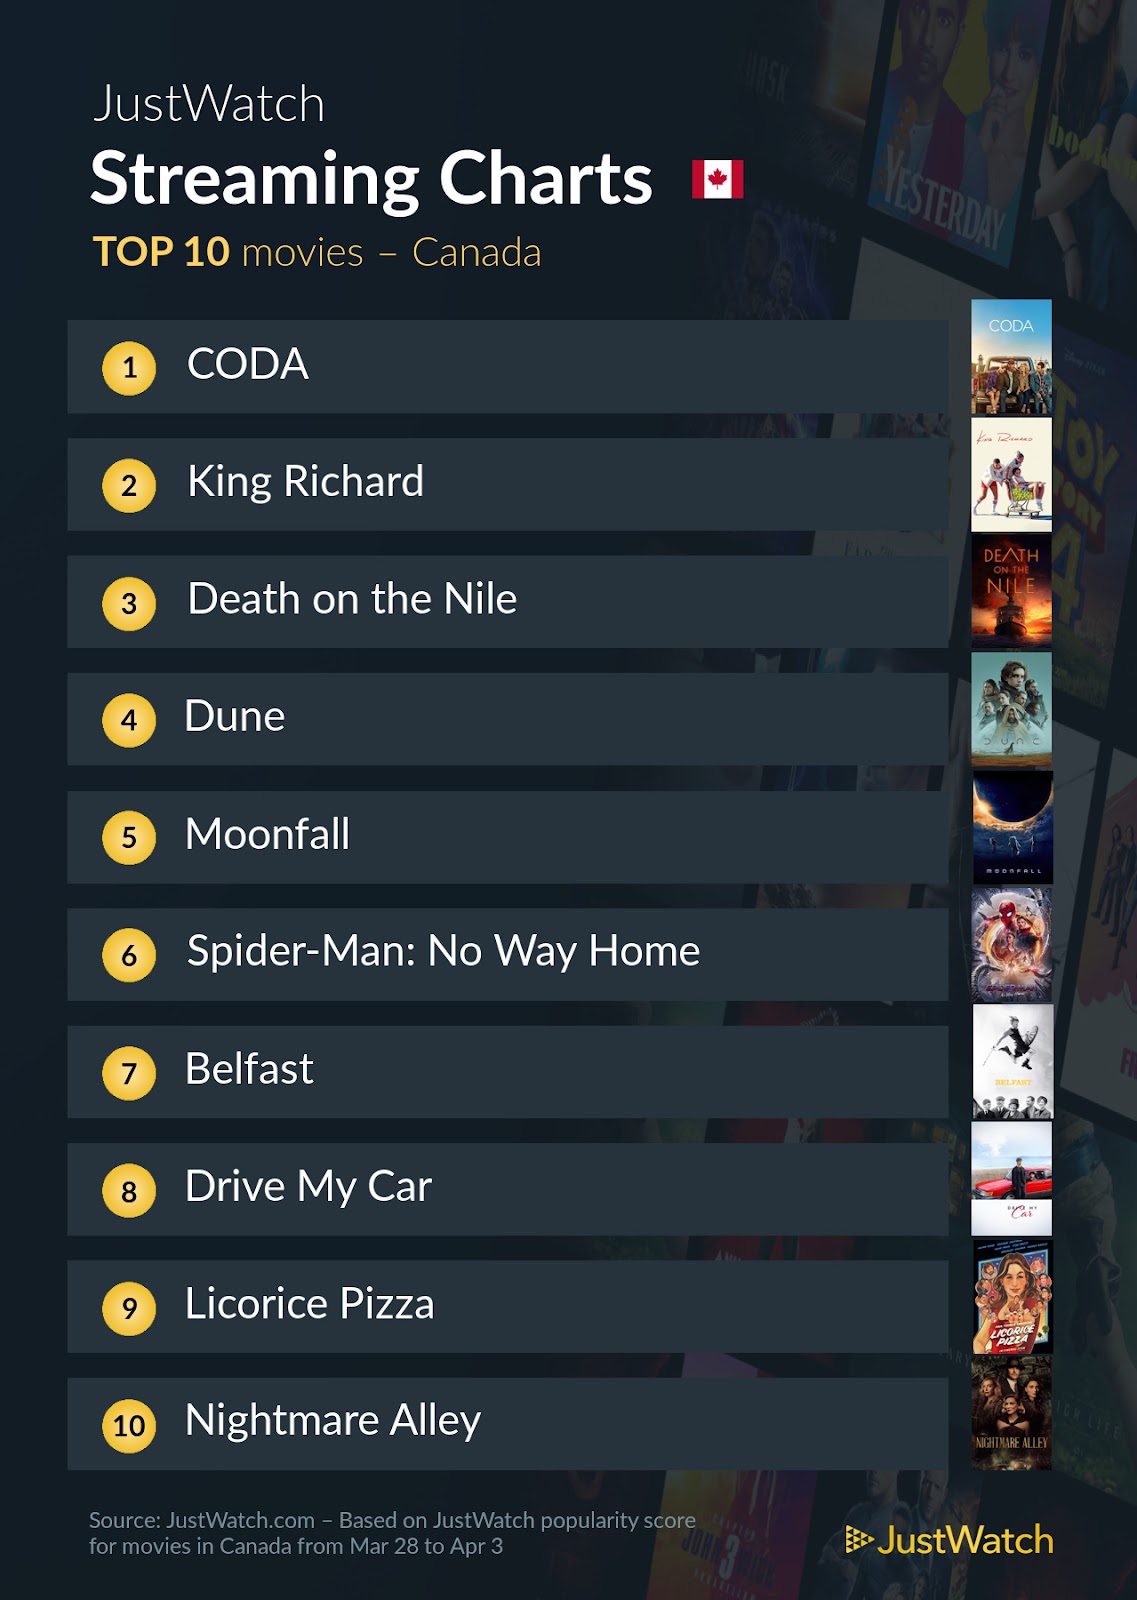 halo coda moon knight canada top streaming charts most popular movies TV shows right now